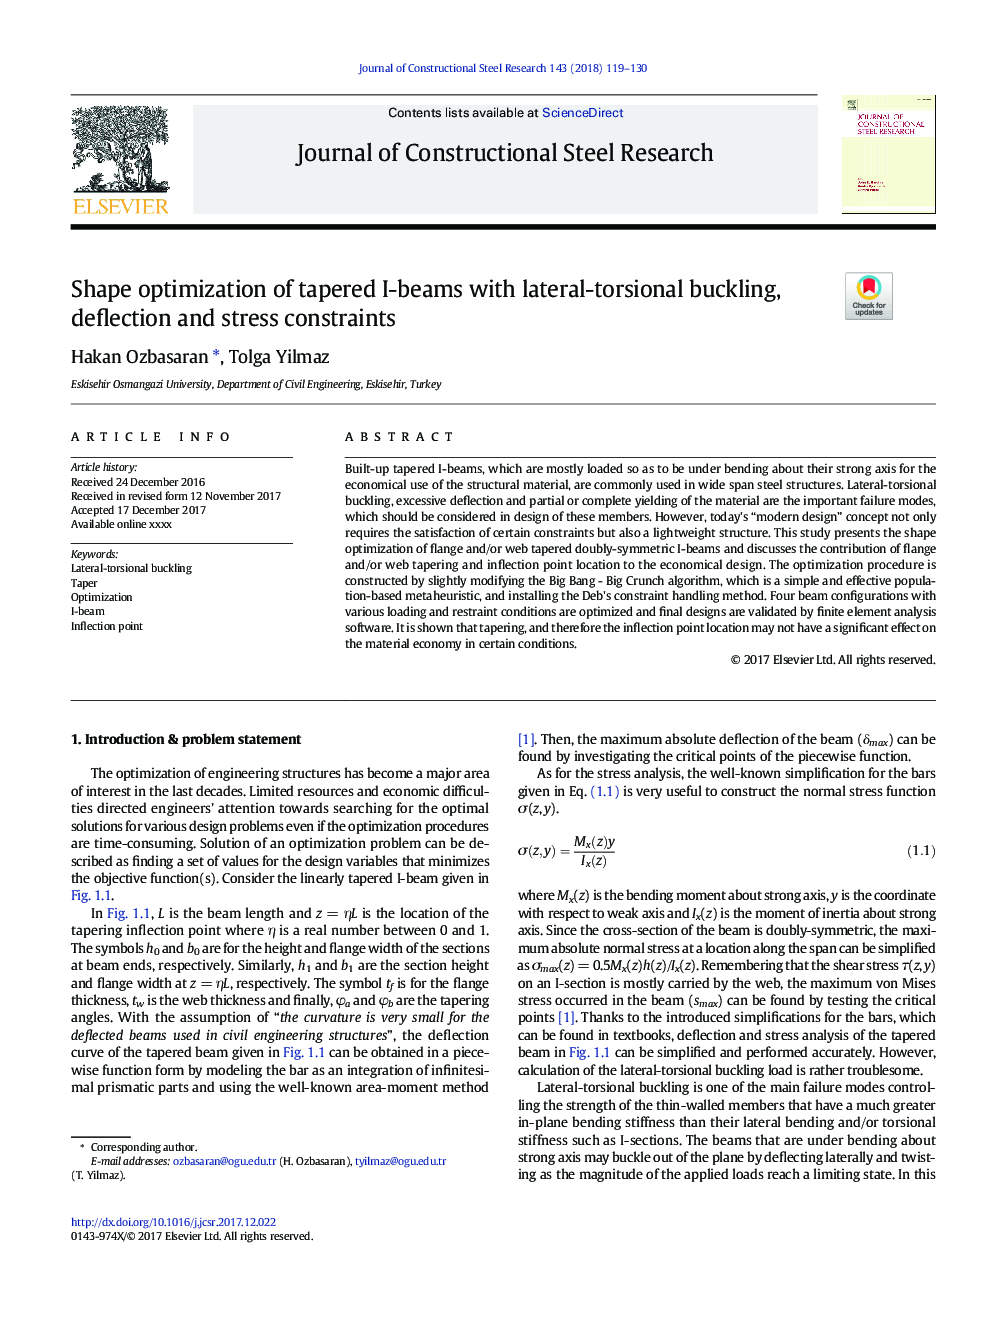 Shape optimization of tapered I-beams with lateral-torsional buckling, deflection and stress constraints